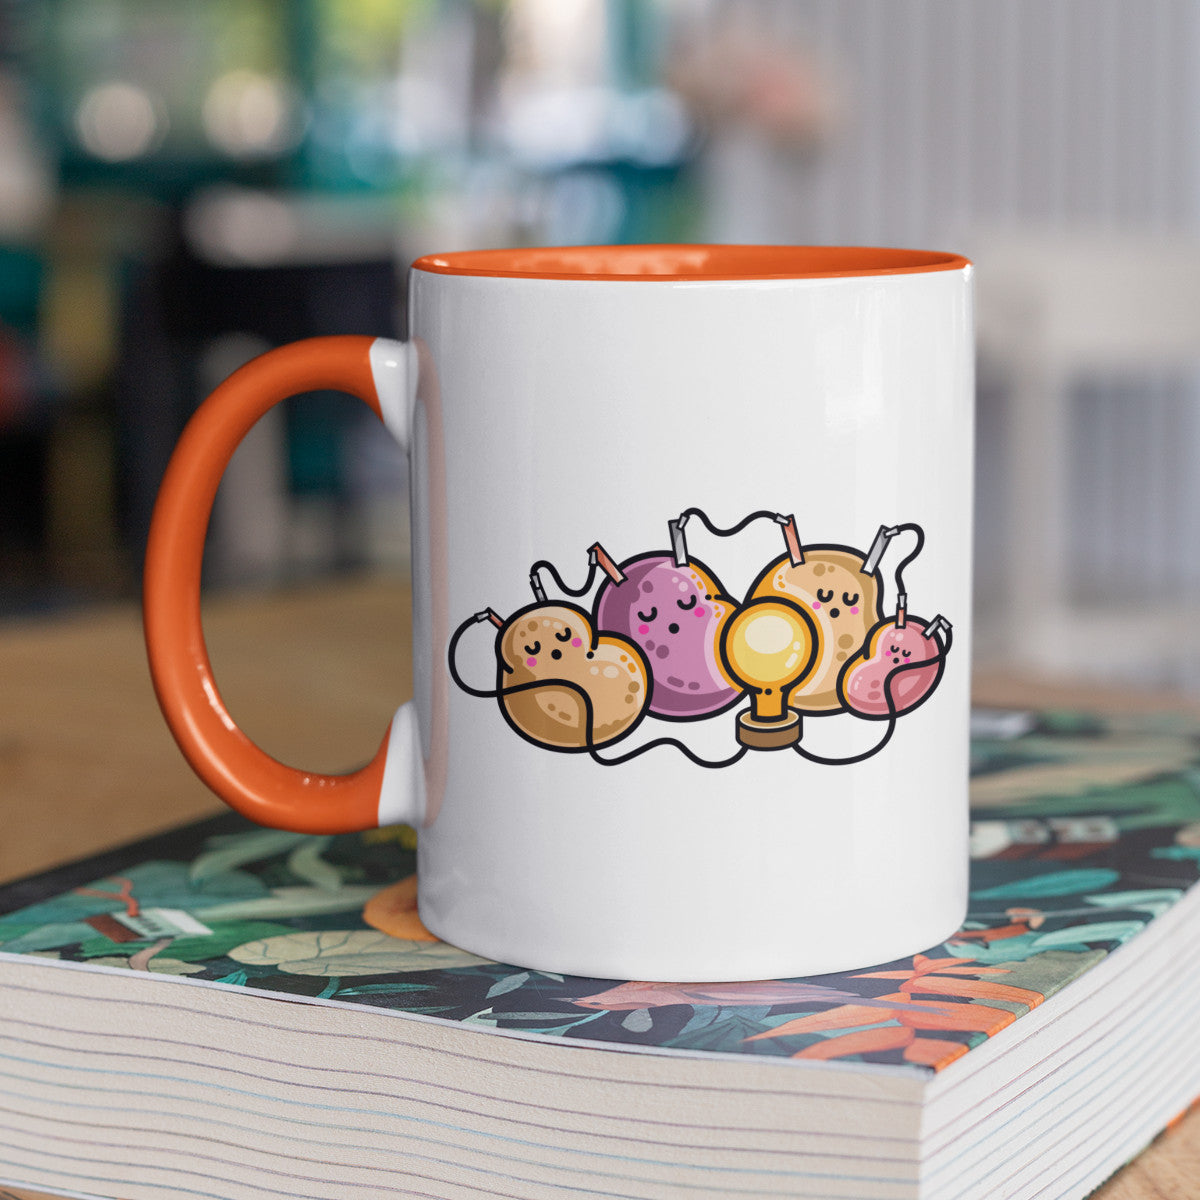 A two-toned white and orange ceramic mug, standing on a book, with a design of a potato battery of 4 potatoes asleep around a light bulb they are powering